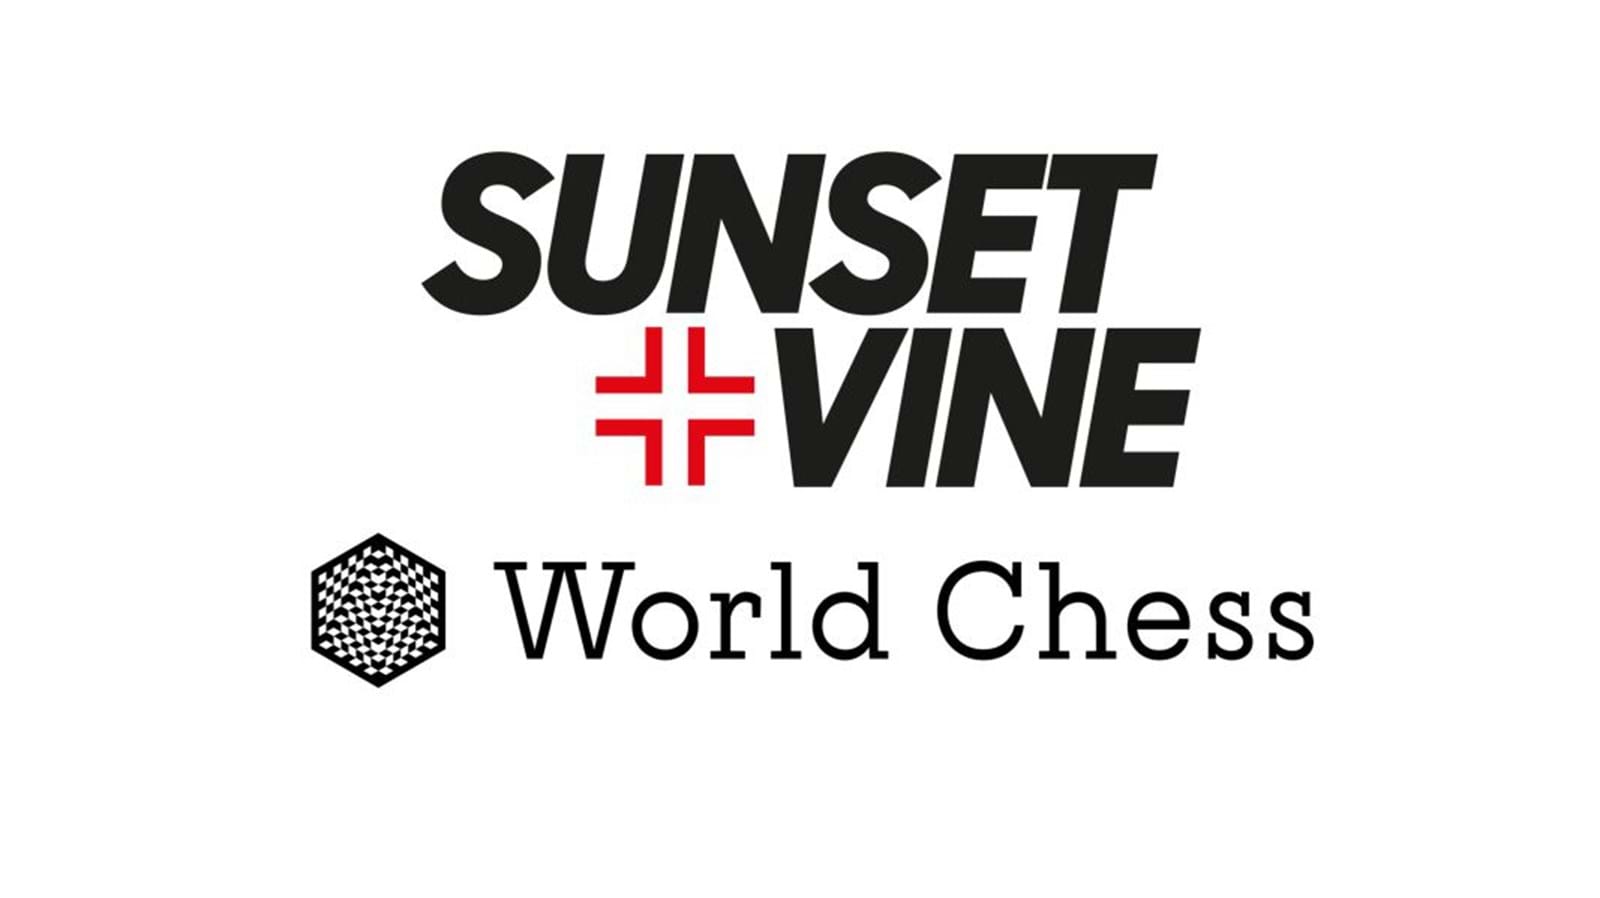 Sunset+Vine partner with World Chess in three year contract